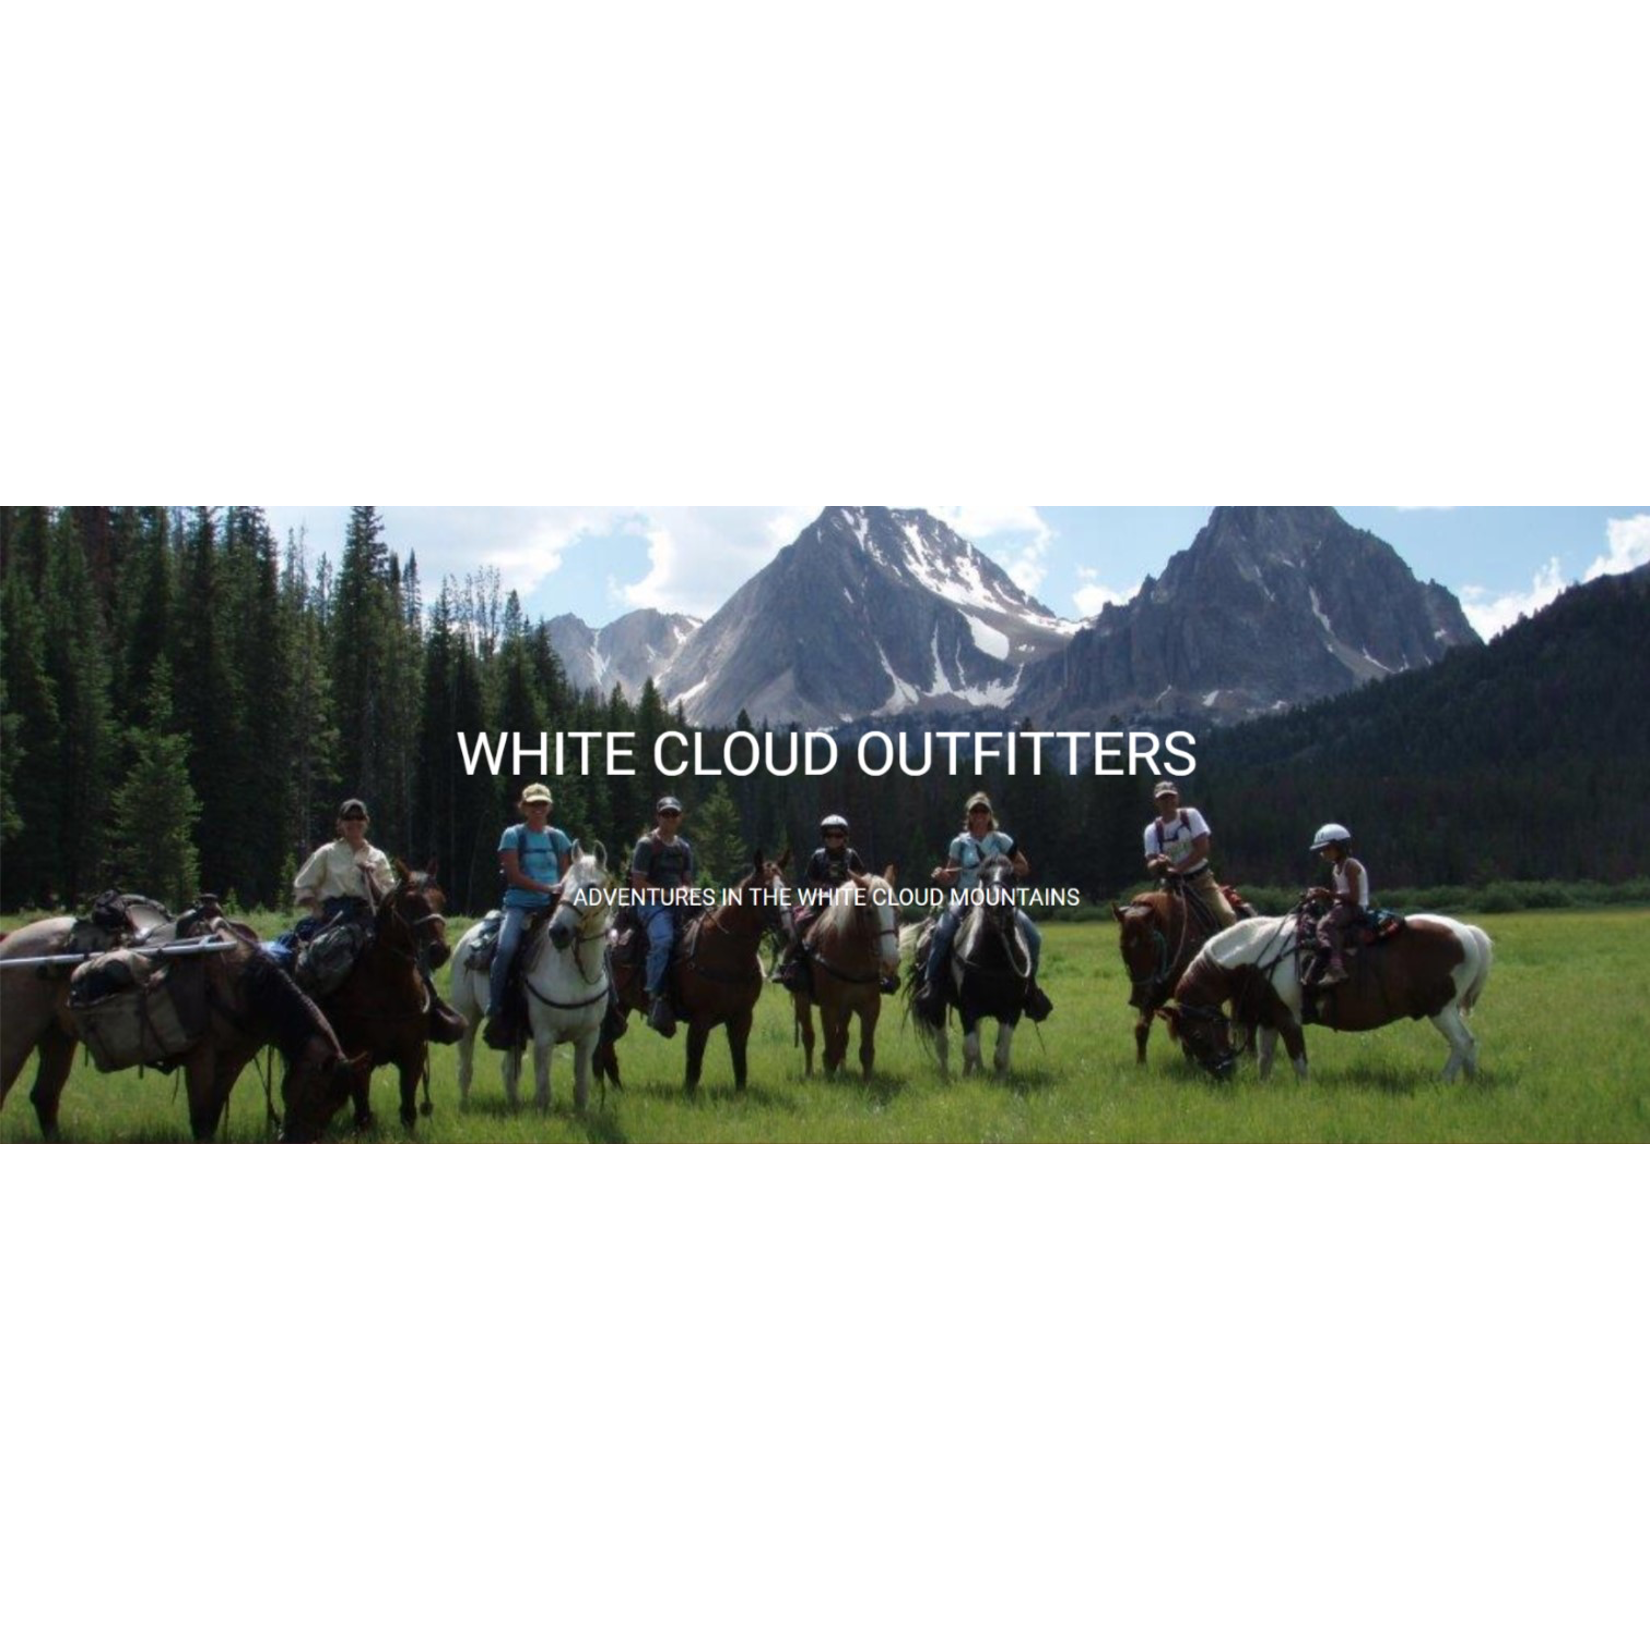 White Cloud Outfitters